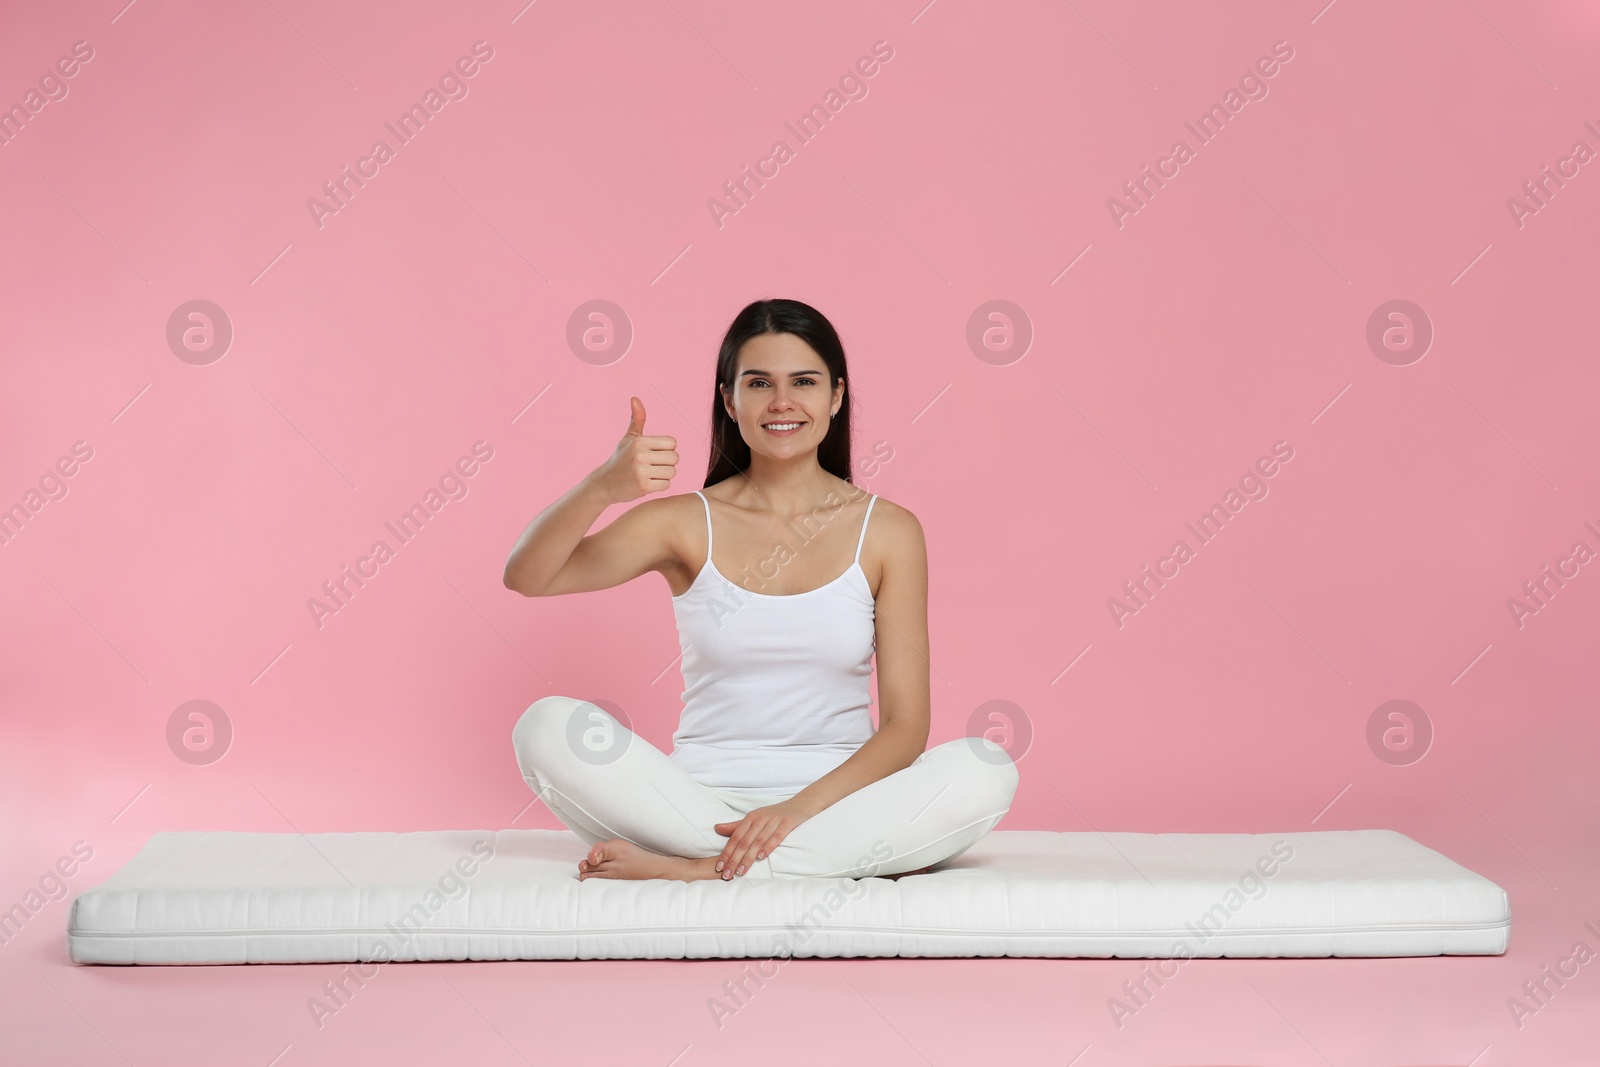 Photo of Young woman sitting on soft mattress and showing thumbs up against pink background